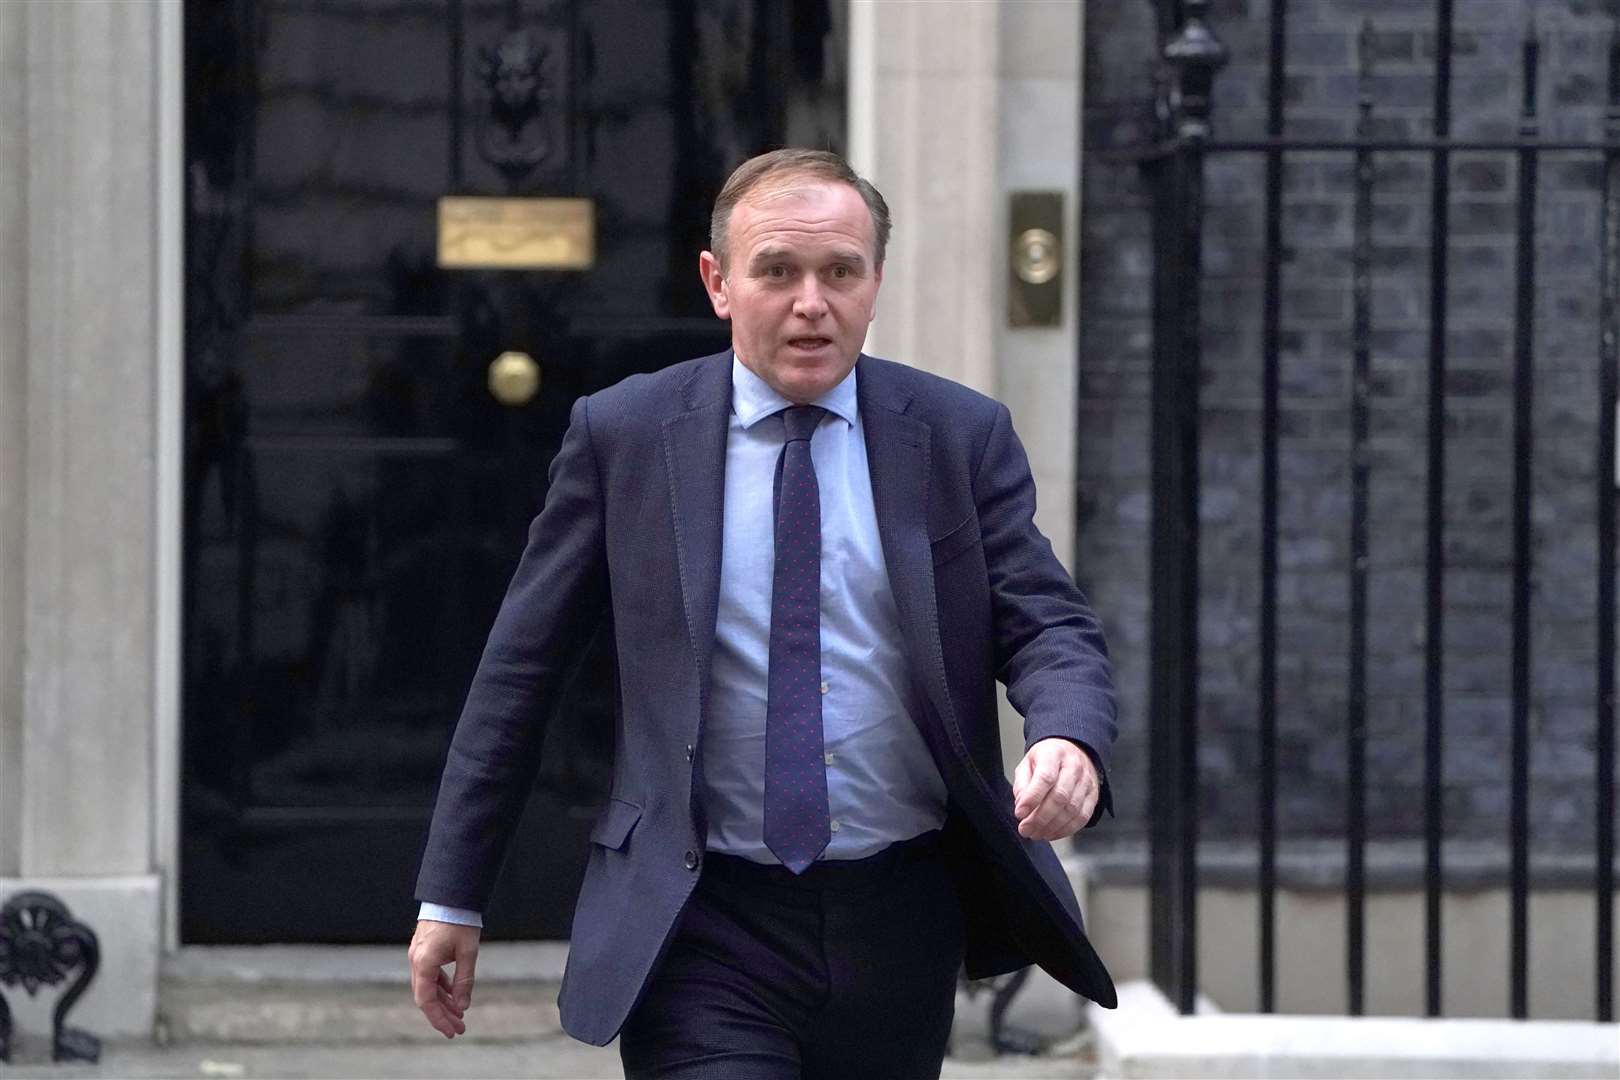 Environment Secretary George Eustice leaves Downing Street (Kirsty O’Connor/PA)